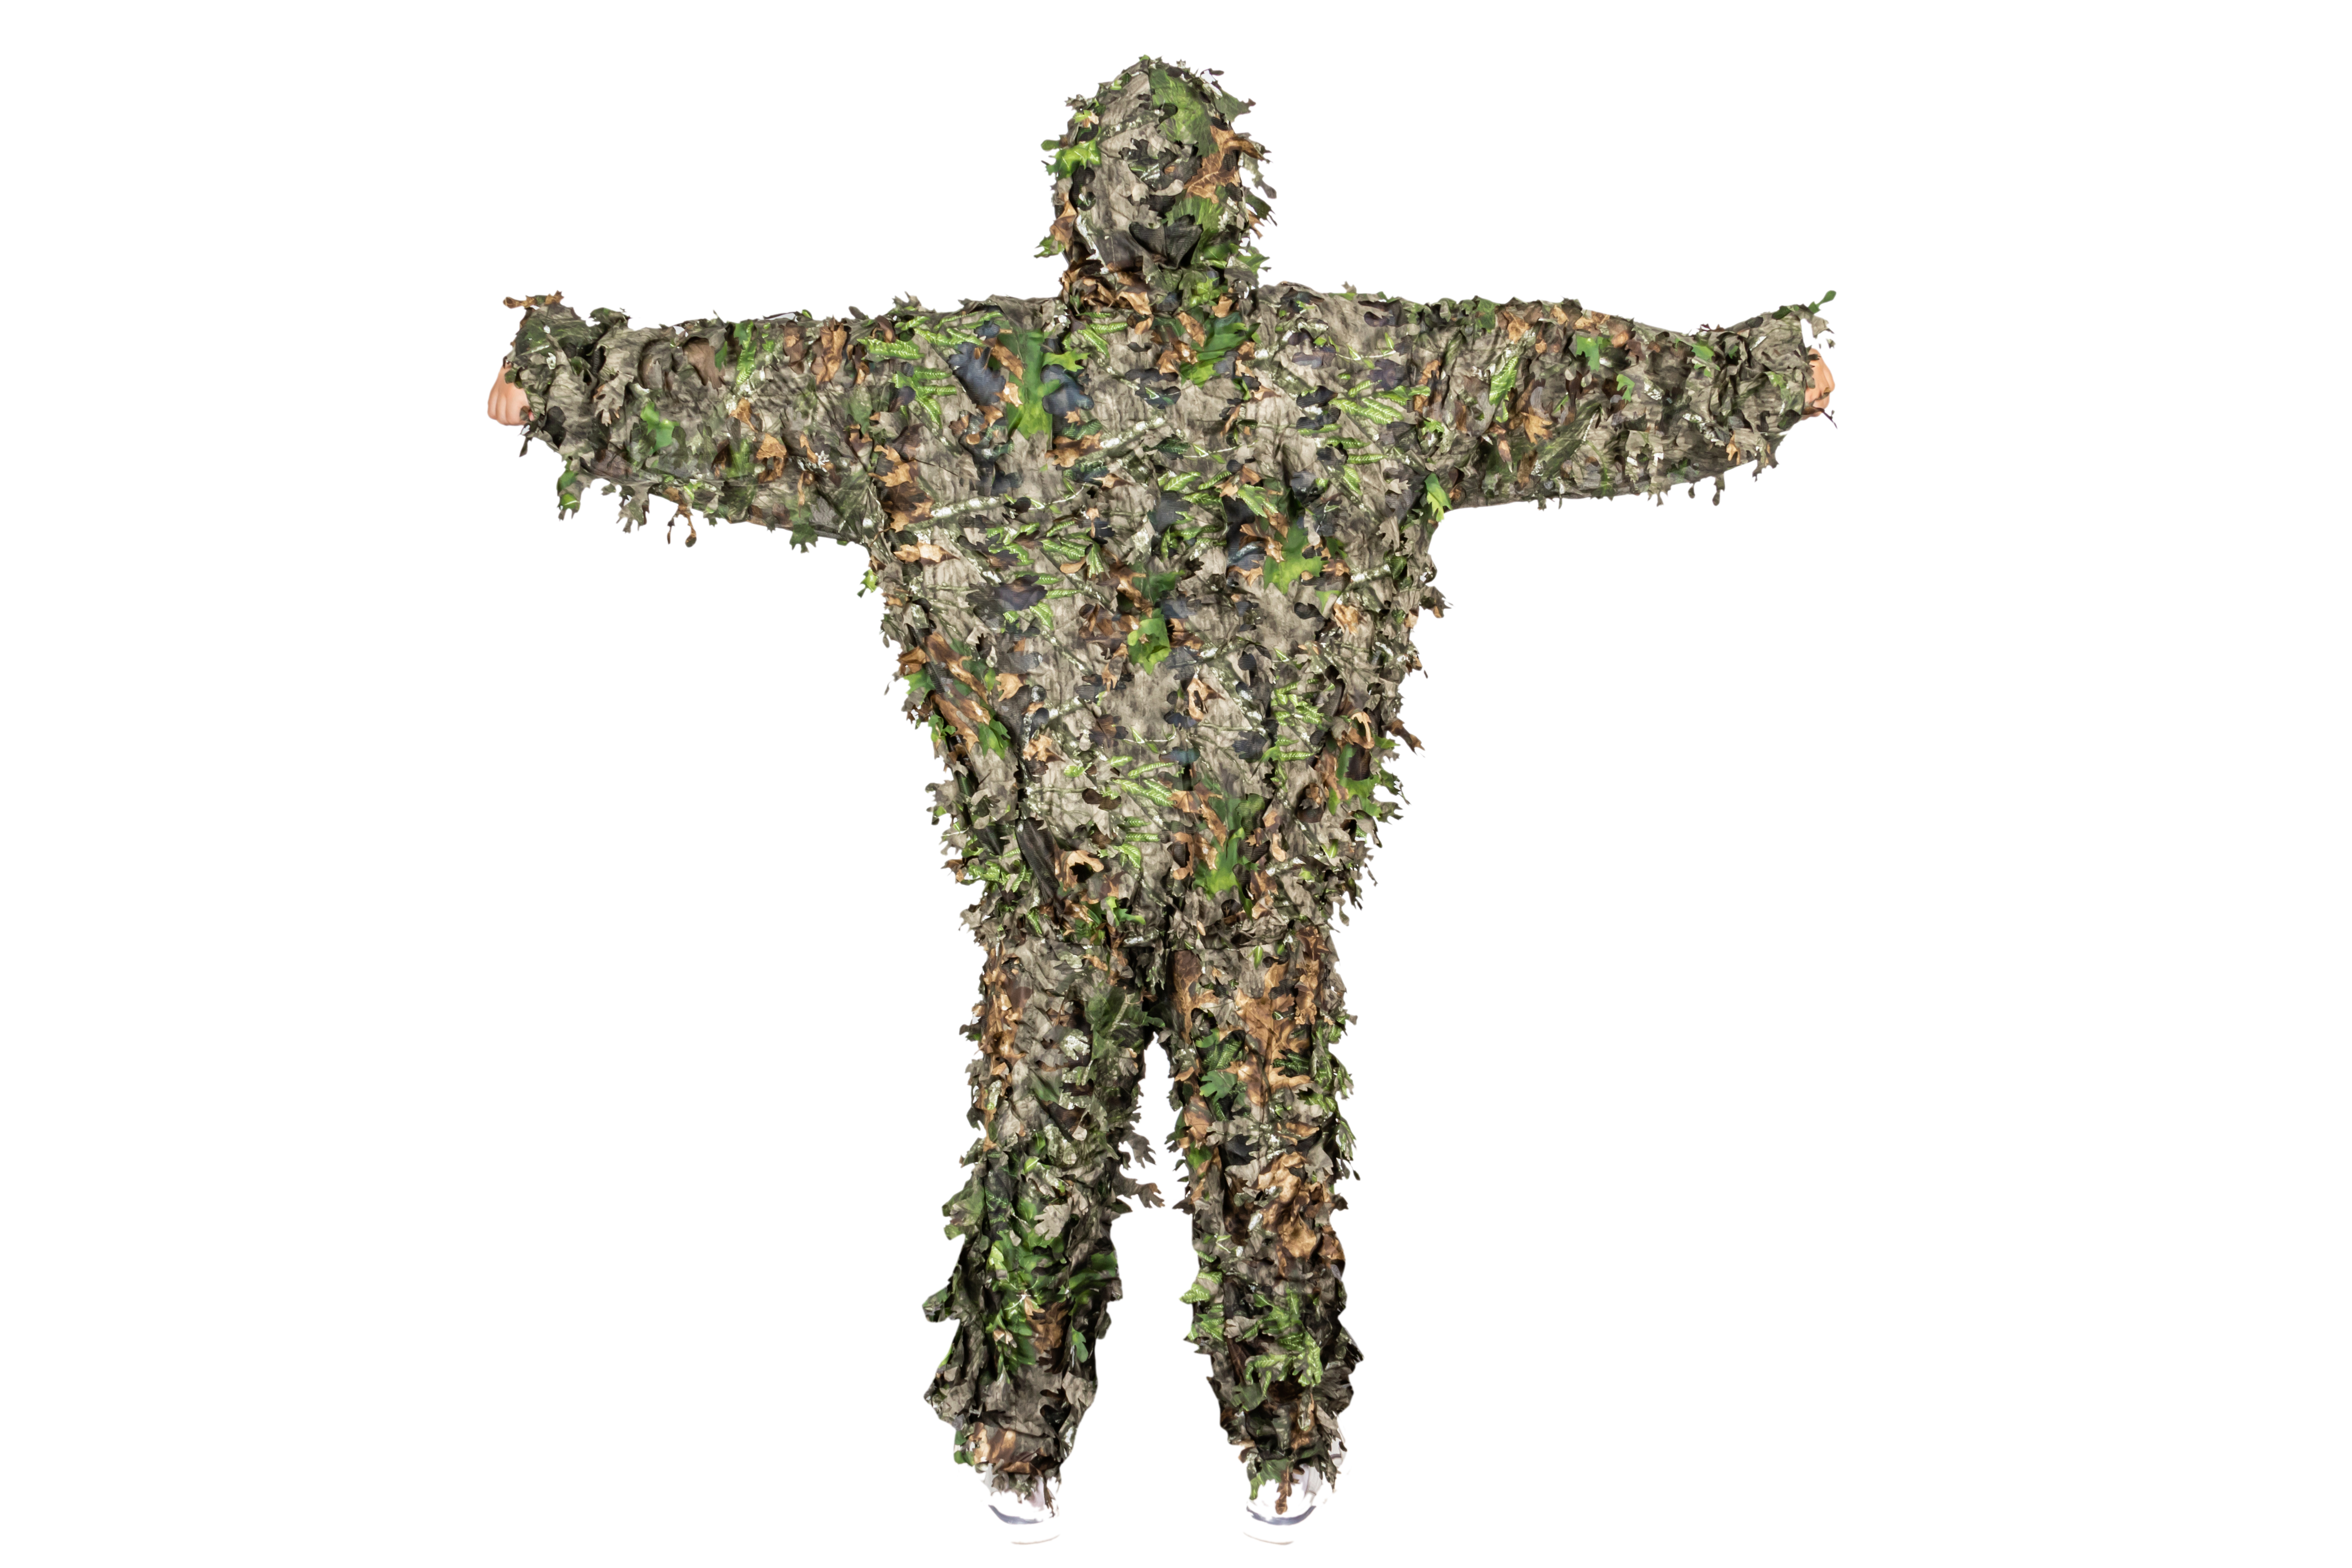 Outdoor camouflage suit ghille suit for hunting Military activities